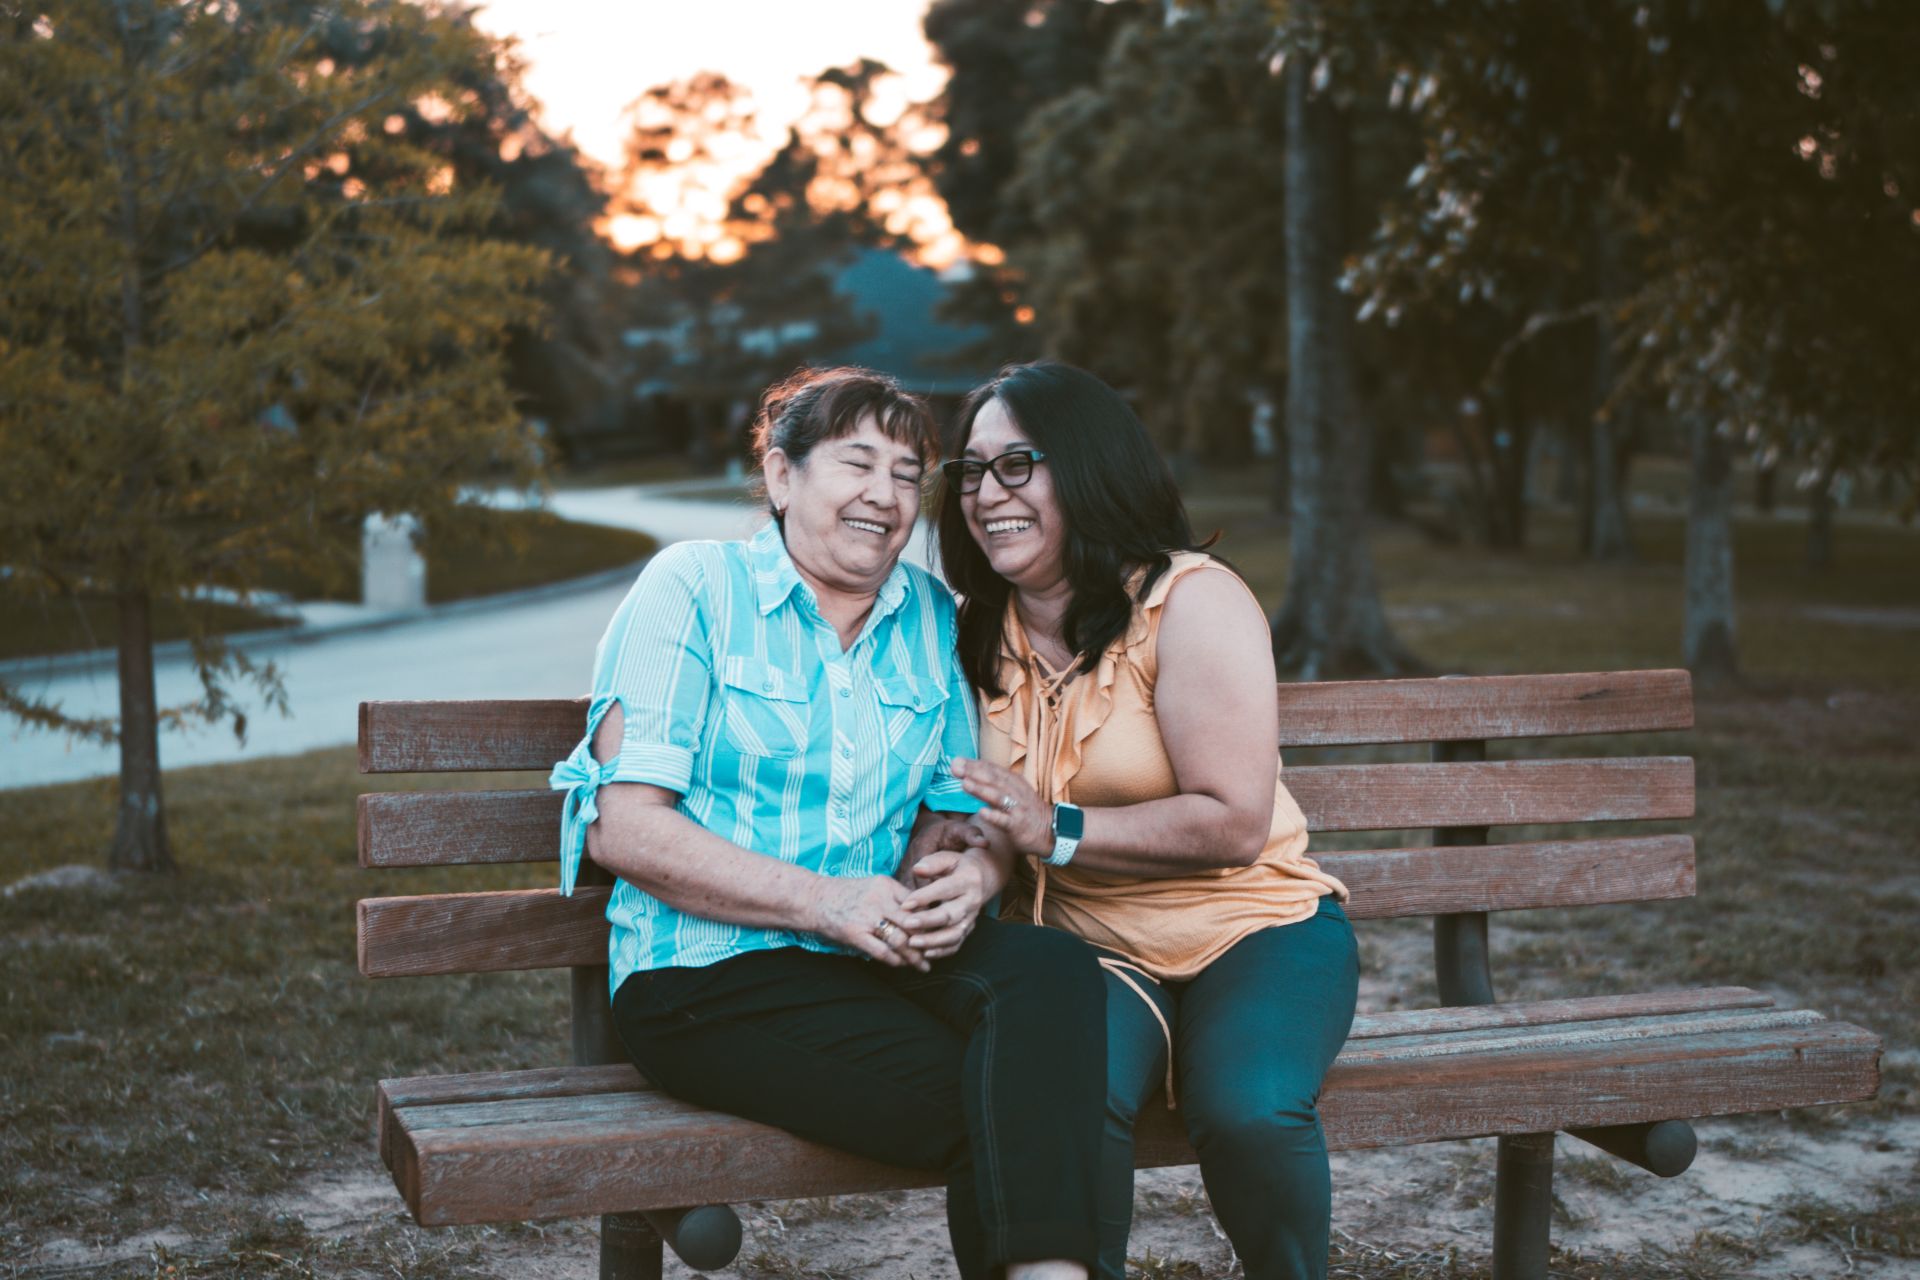 Two intergenerational women sitting close together on a park bench